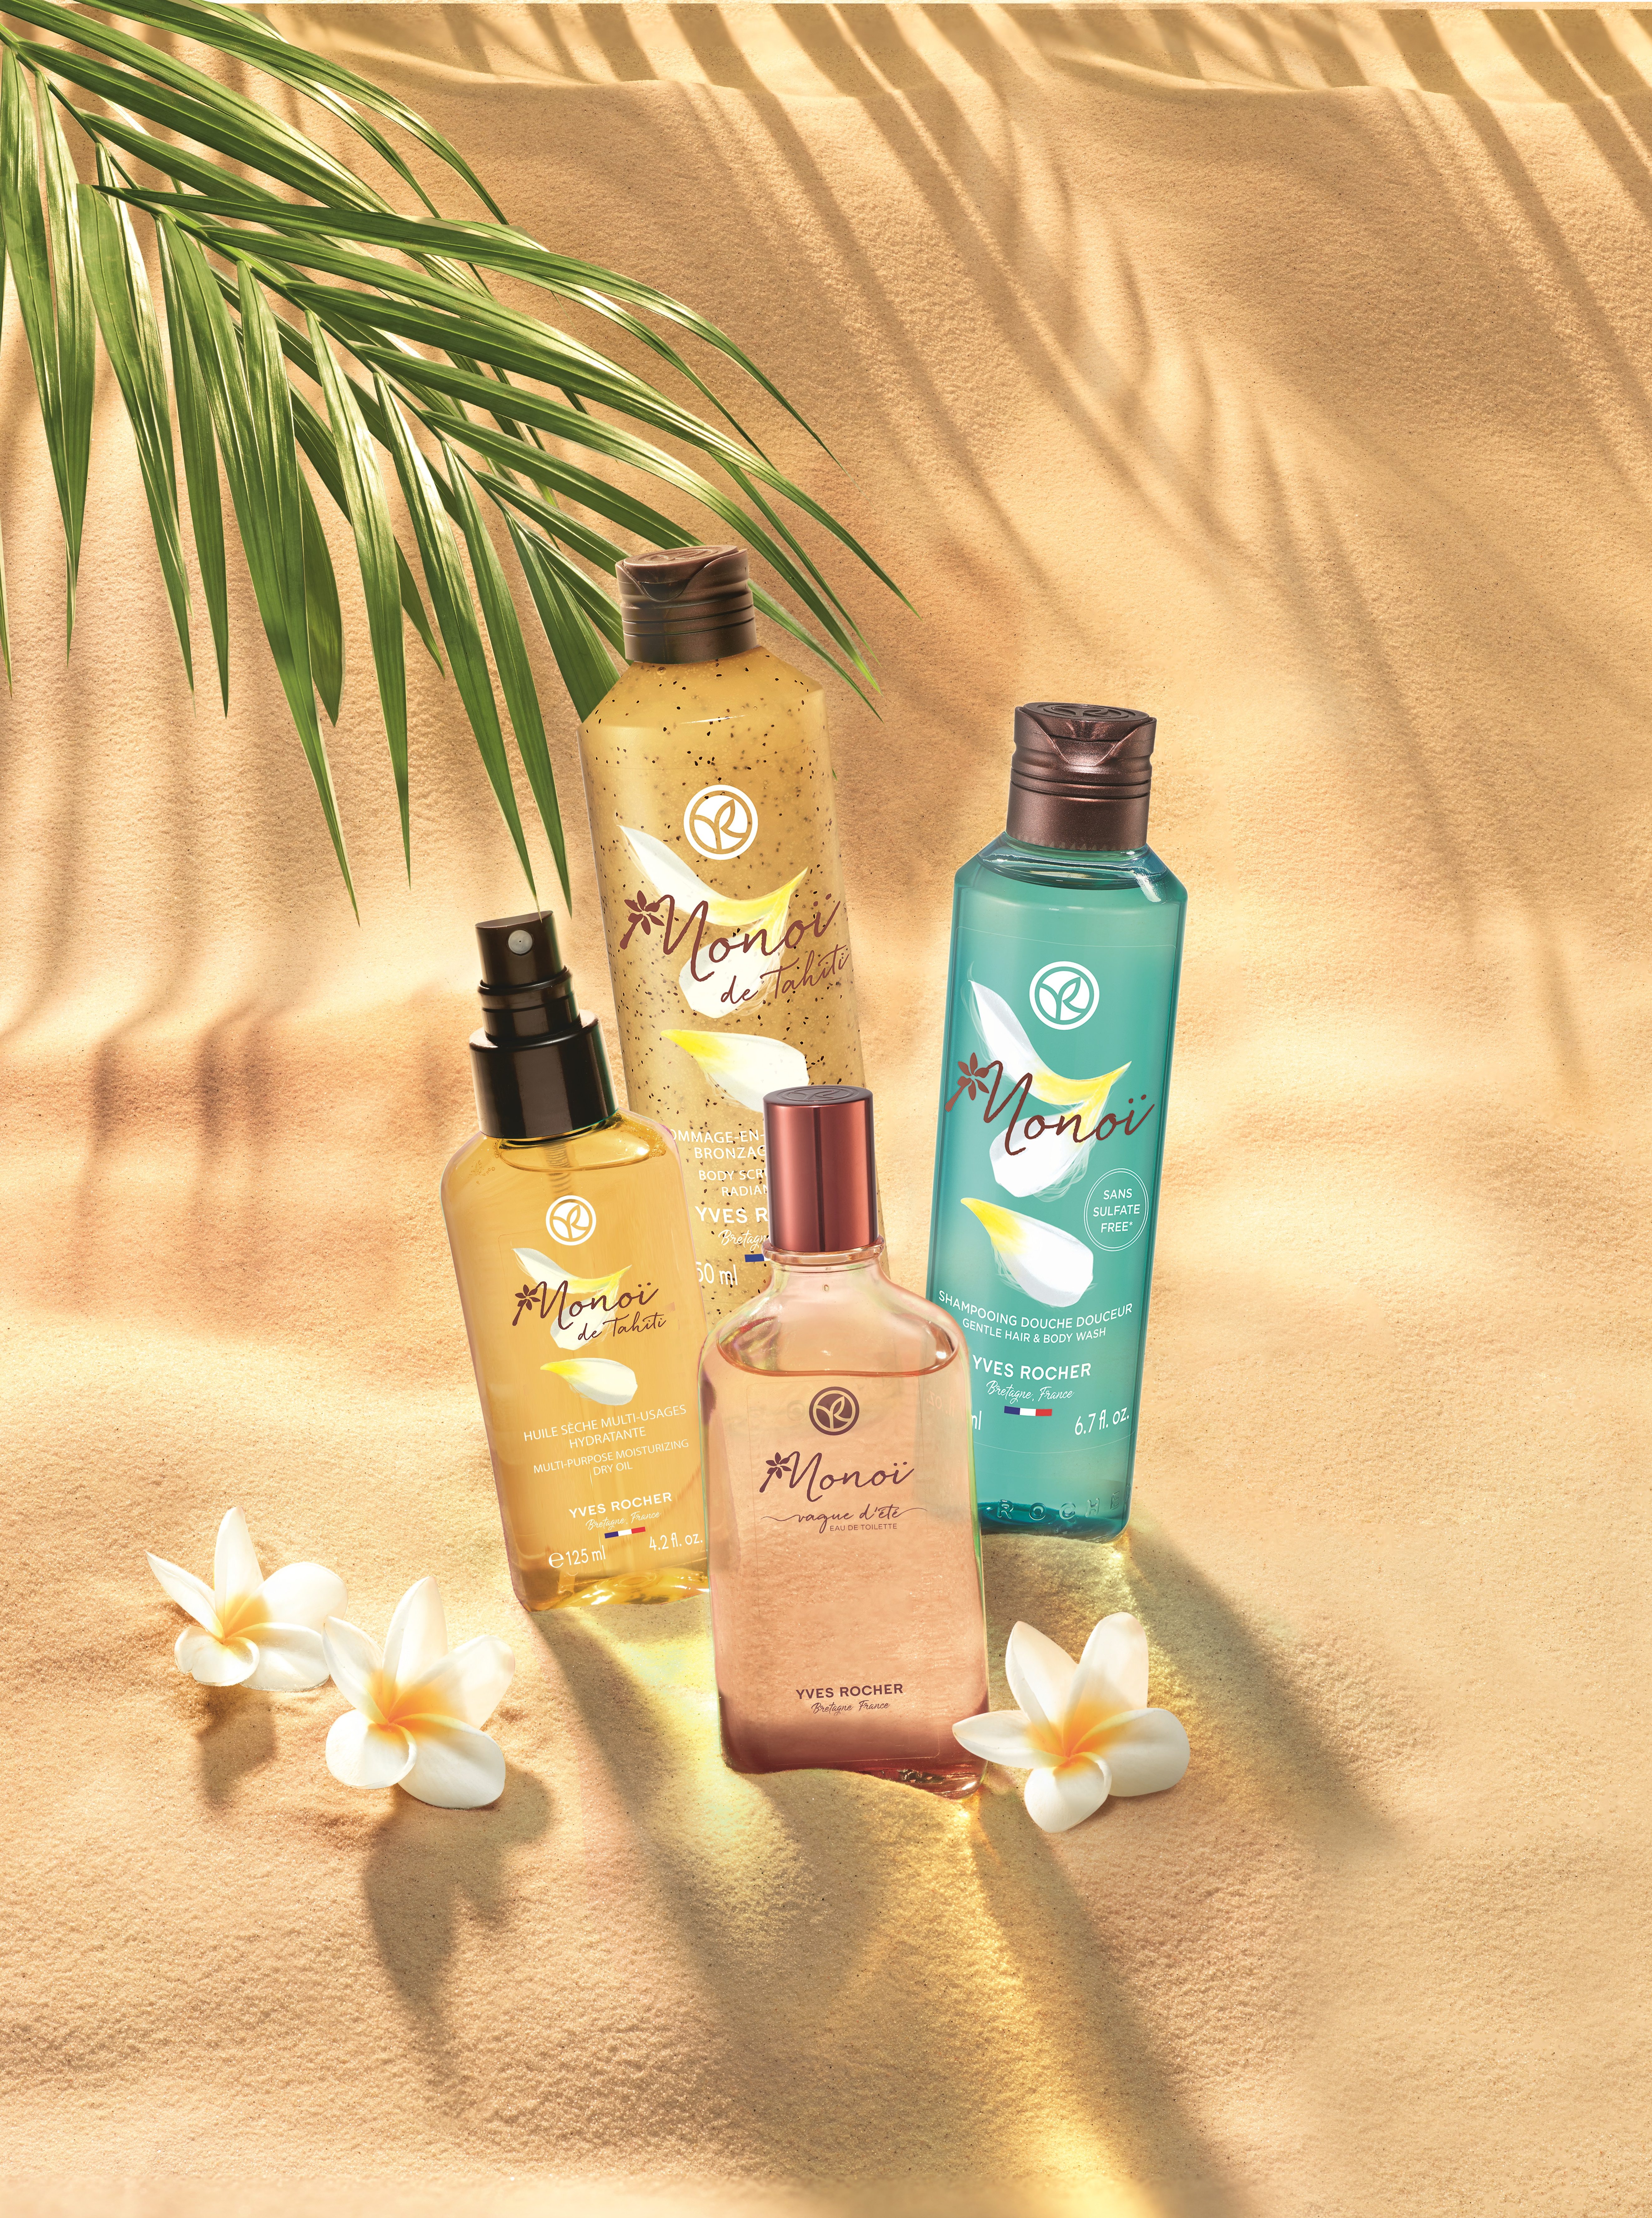 Monoi oil product line by Yves Rocher in the sand